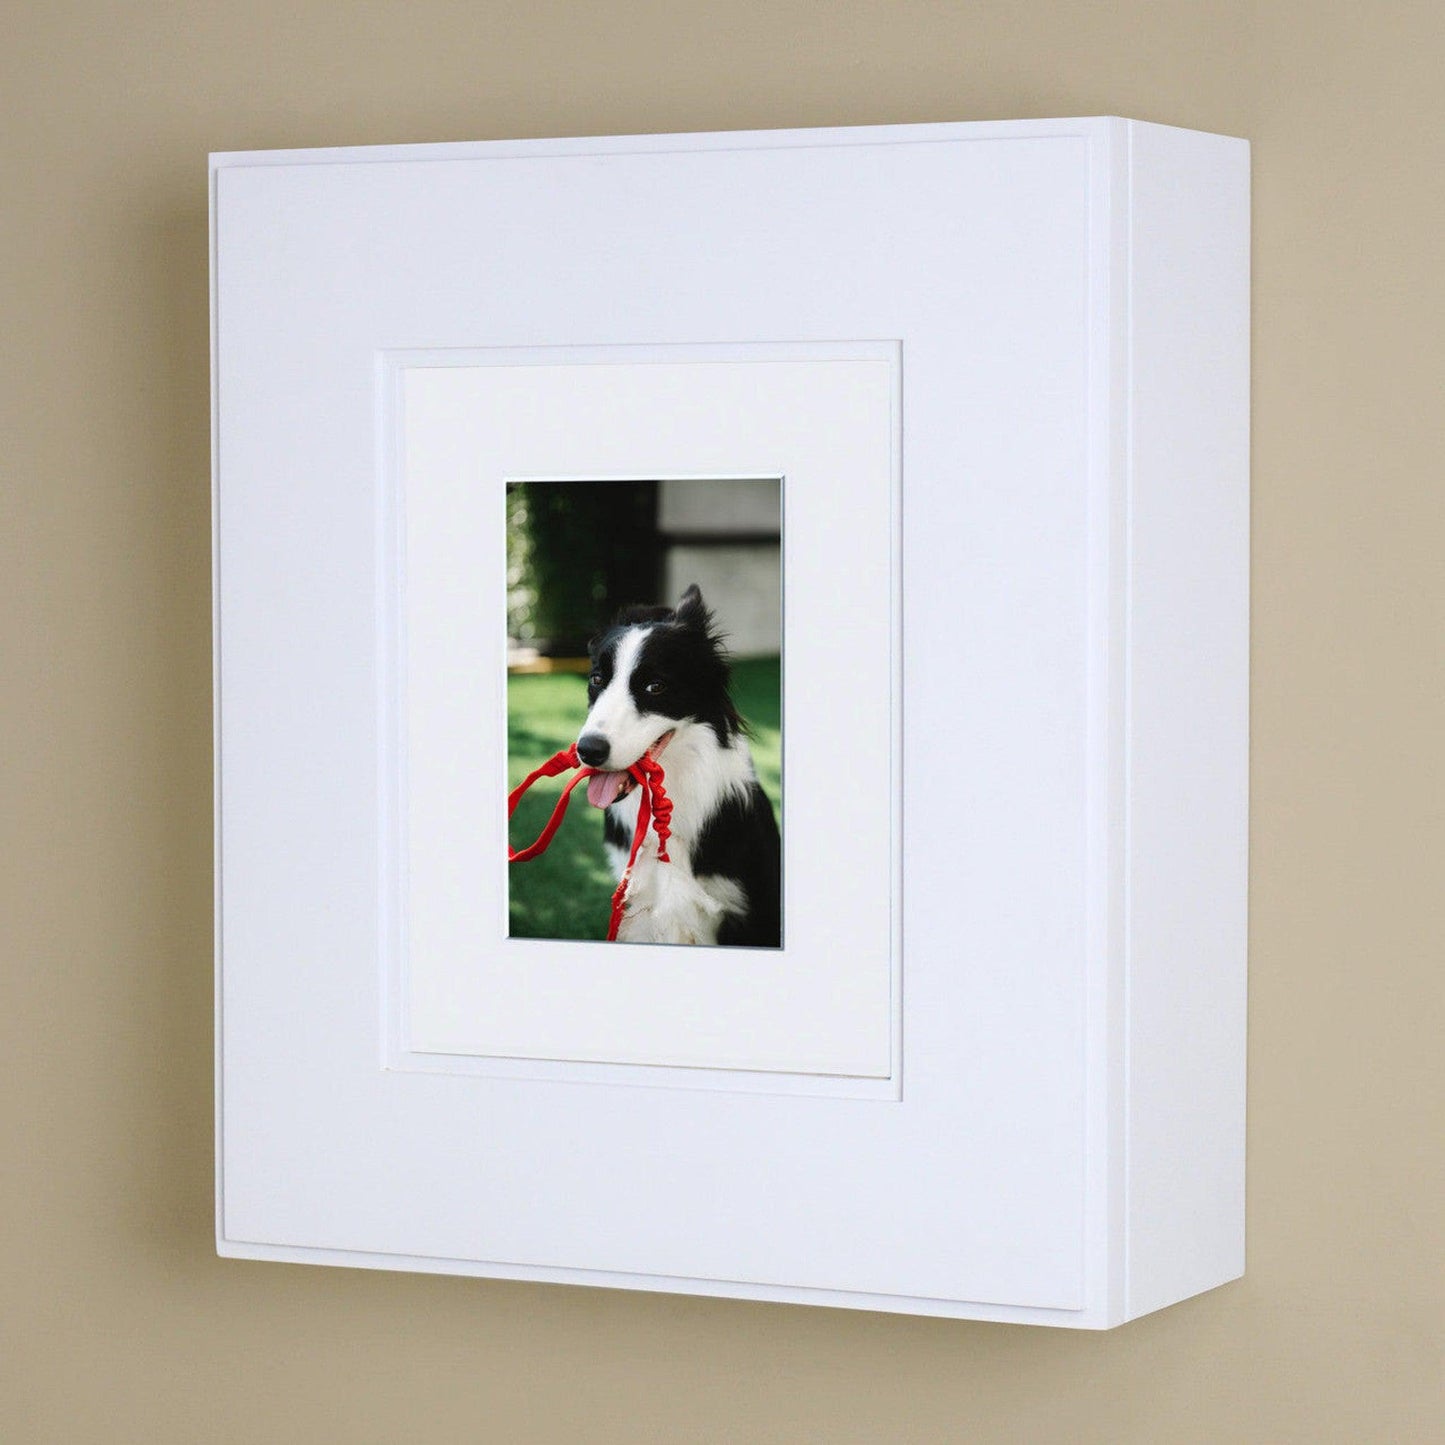 Fox Hollow Furnishings 15" H x 13" W White Shaker Wall Mount Picture Frame Medicine Cabinet With Mirror and White 5" x 7" Matting